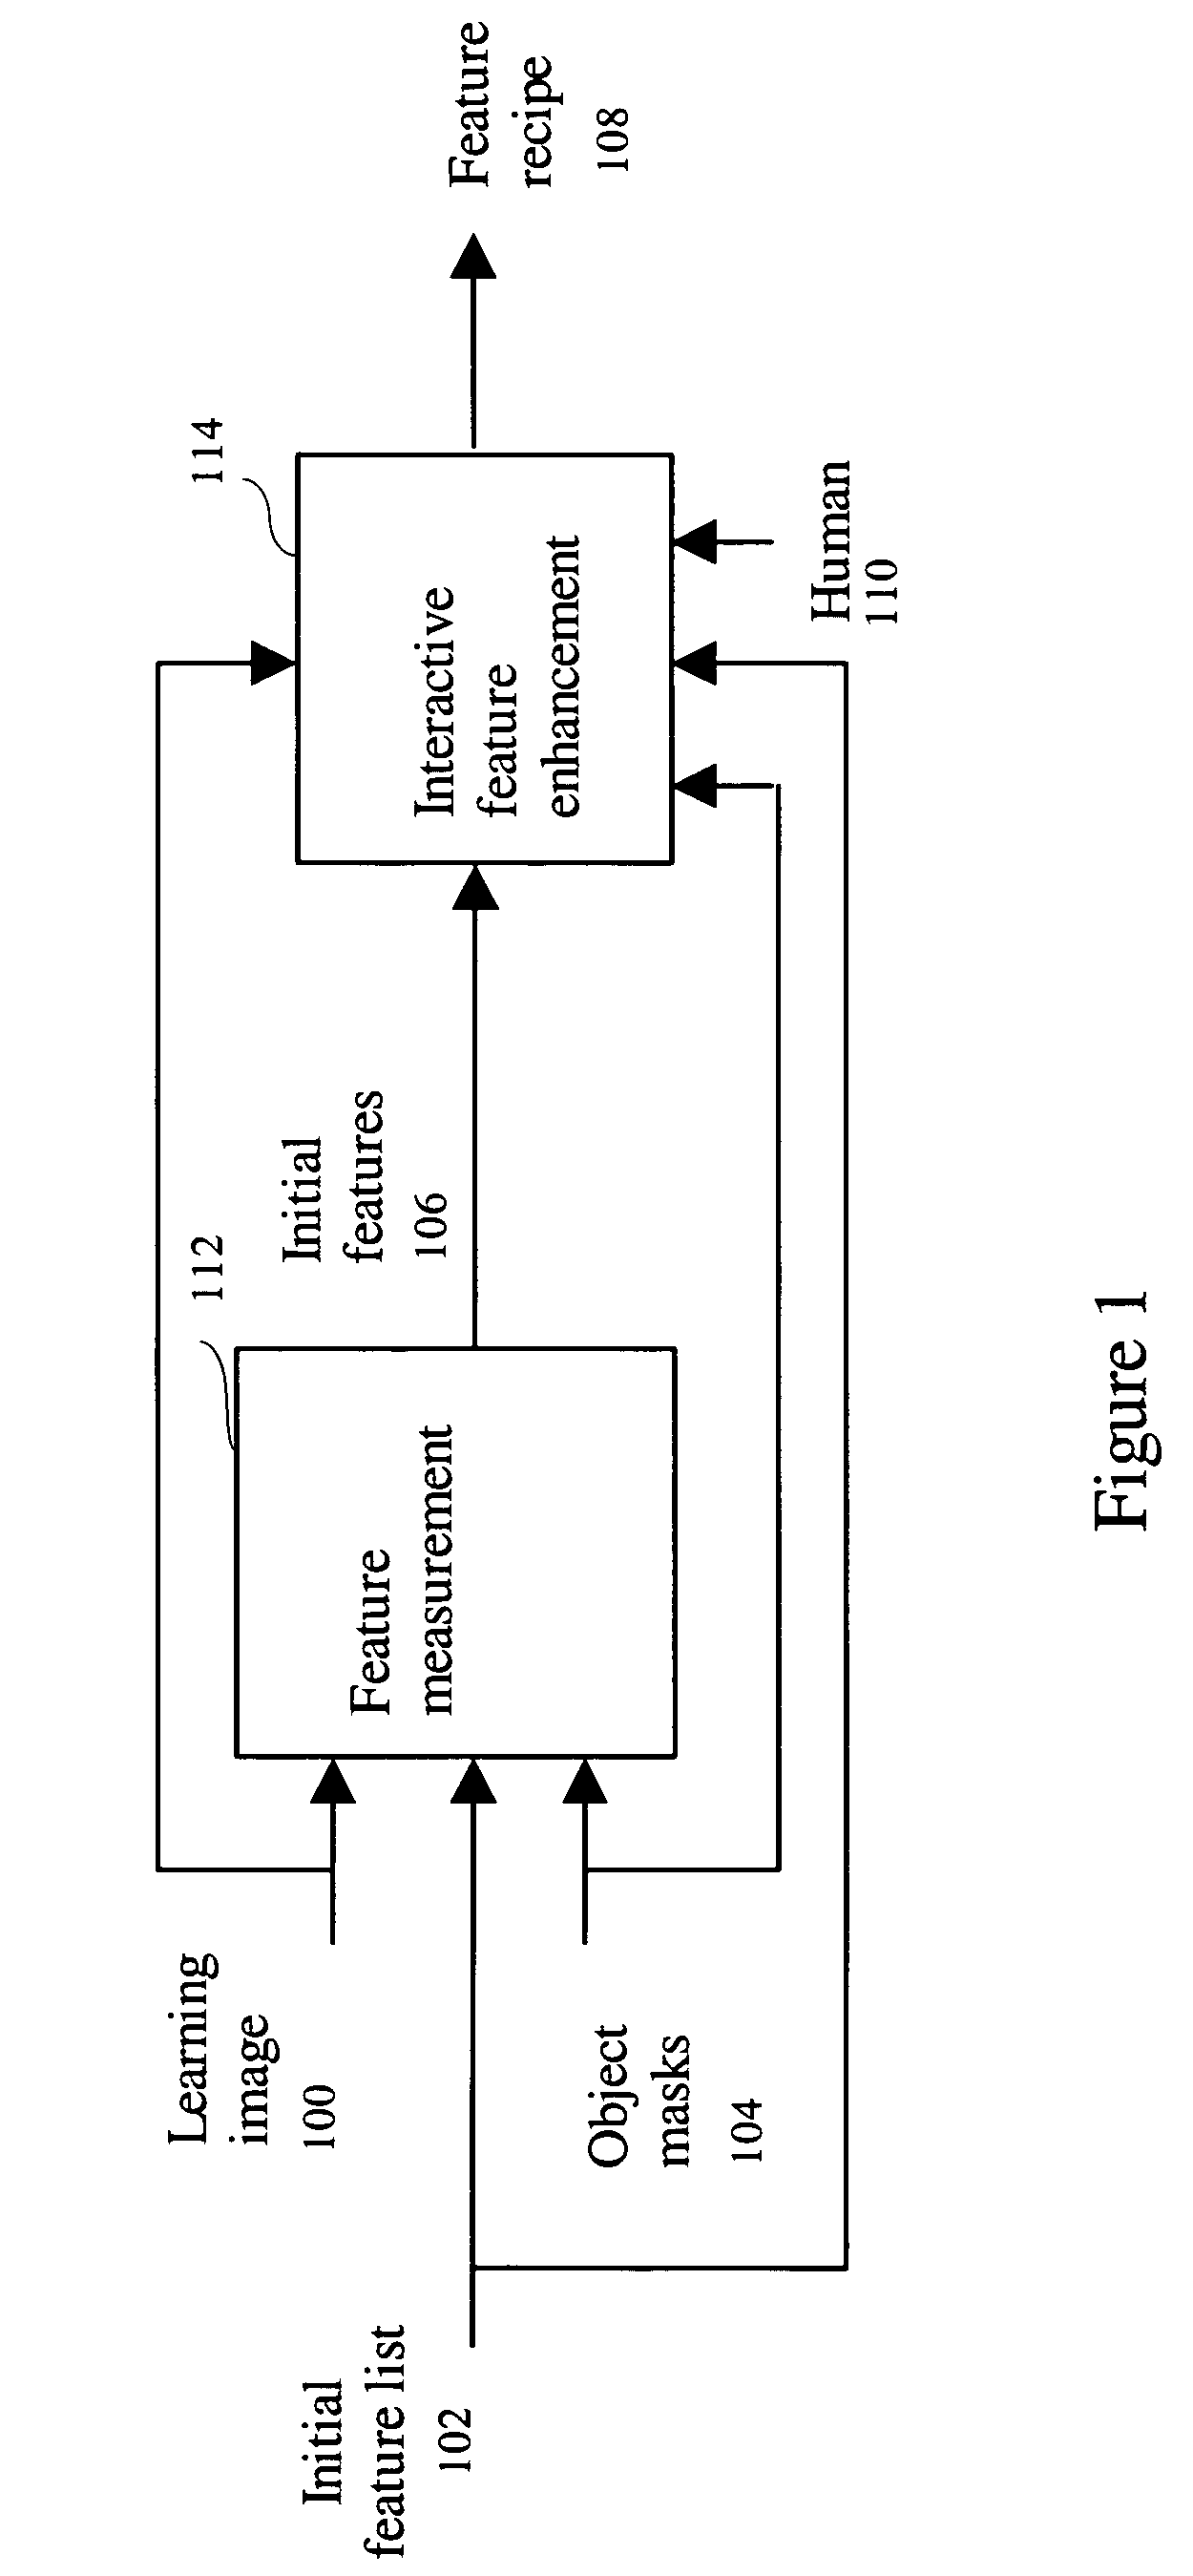 Method of directed feature development for image pattern recognition